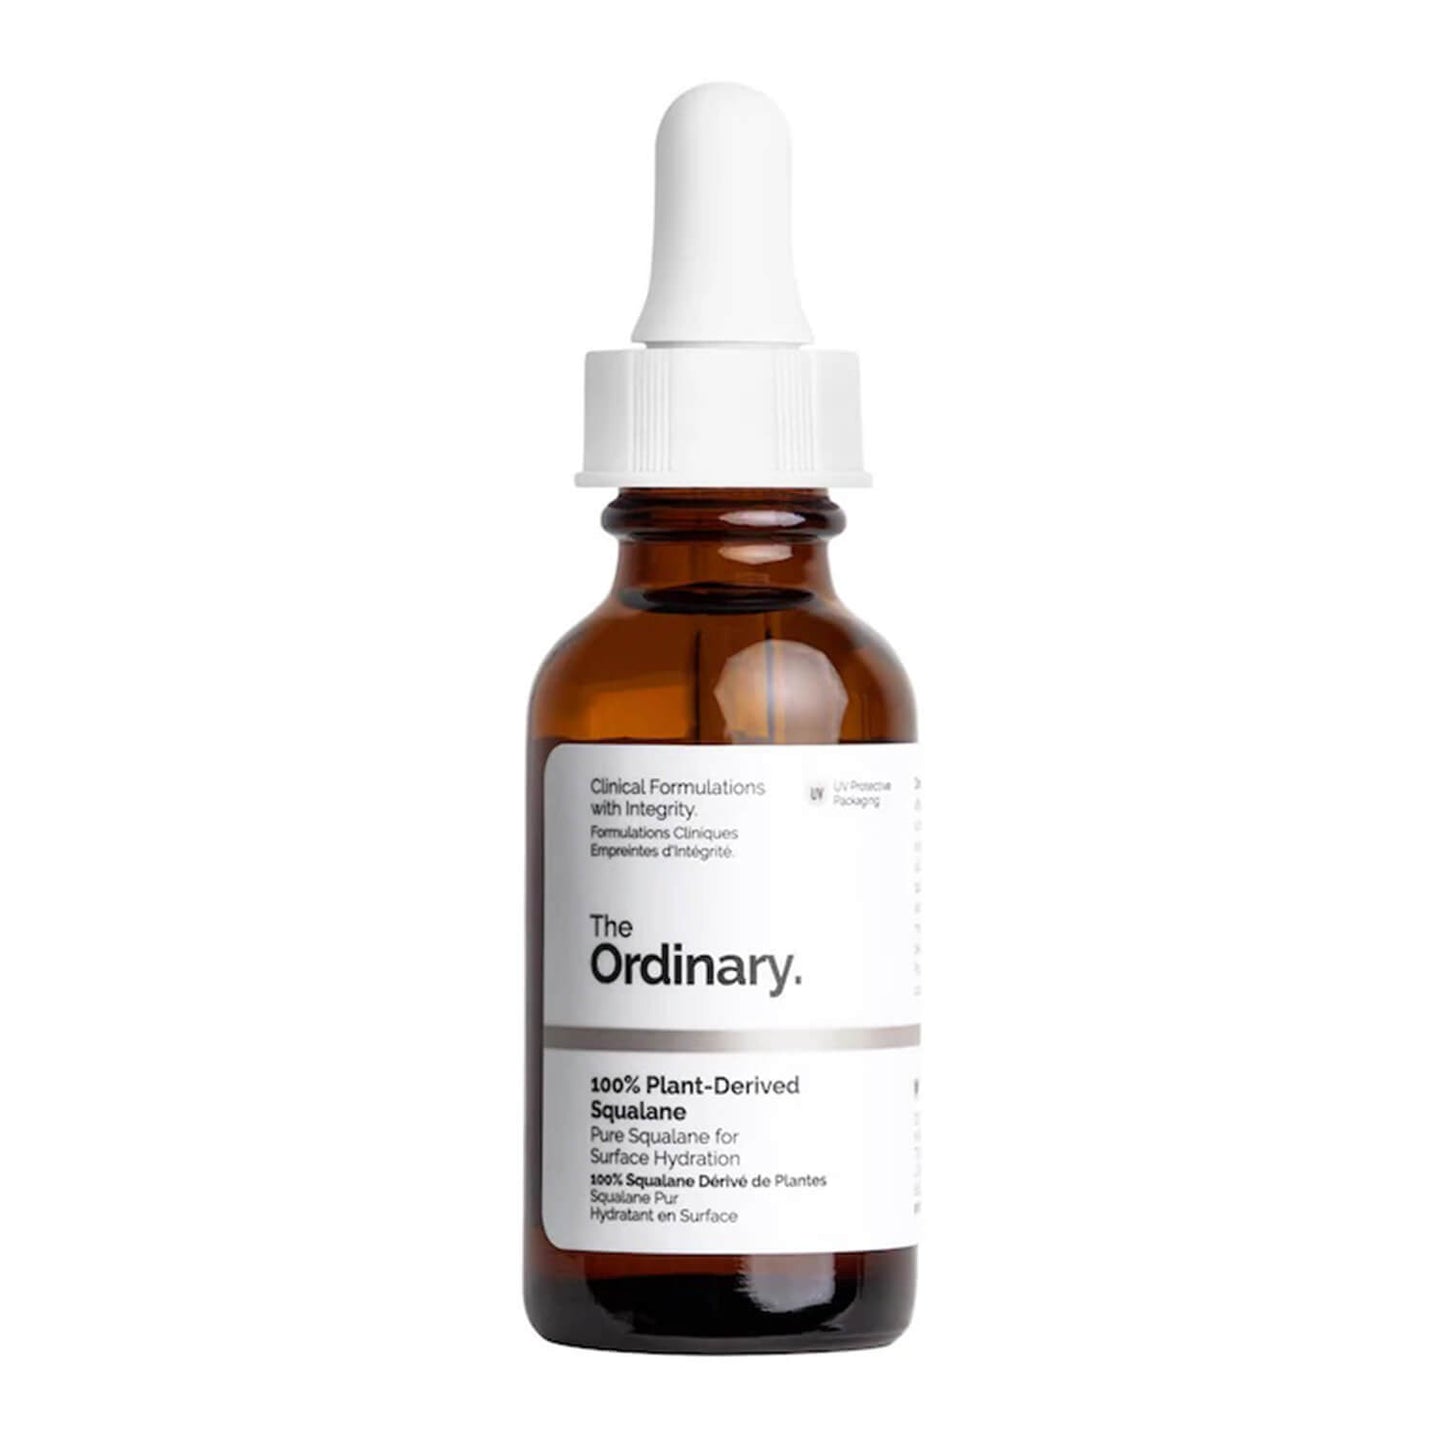 Shop The Ordinary 100% Plant-Derived Squalane for dry skin available at Heygirl.pk for delivery in Pakistan